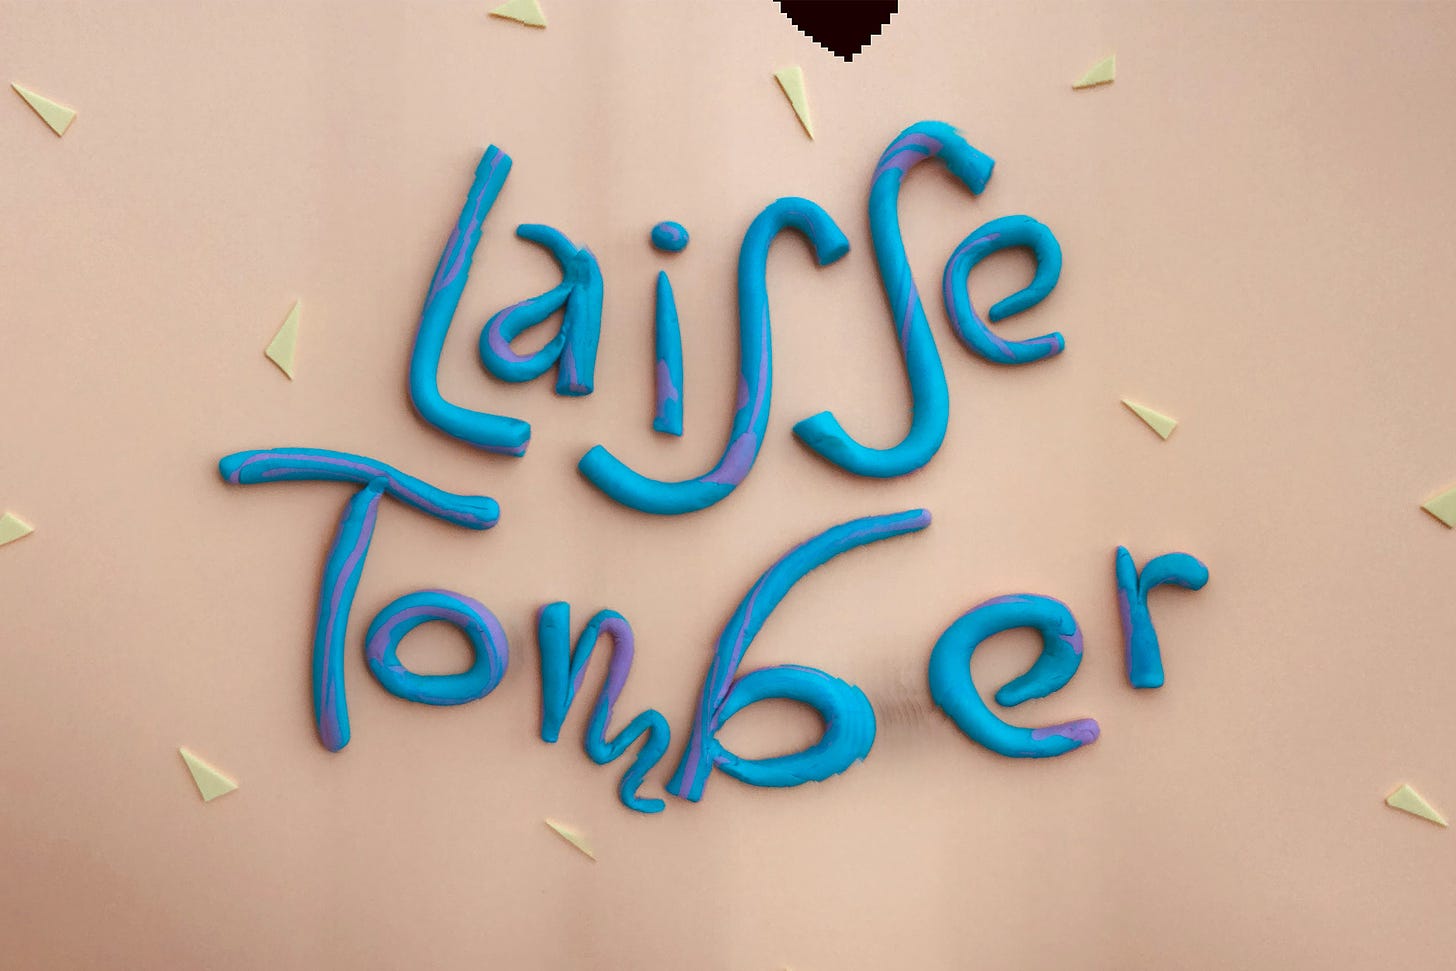 Clay letters that say "Laisse Tomber" or "let it go" on a paper background surrounded by foam triangles